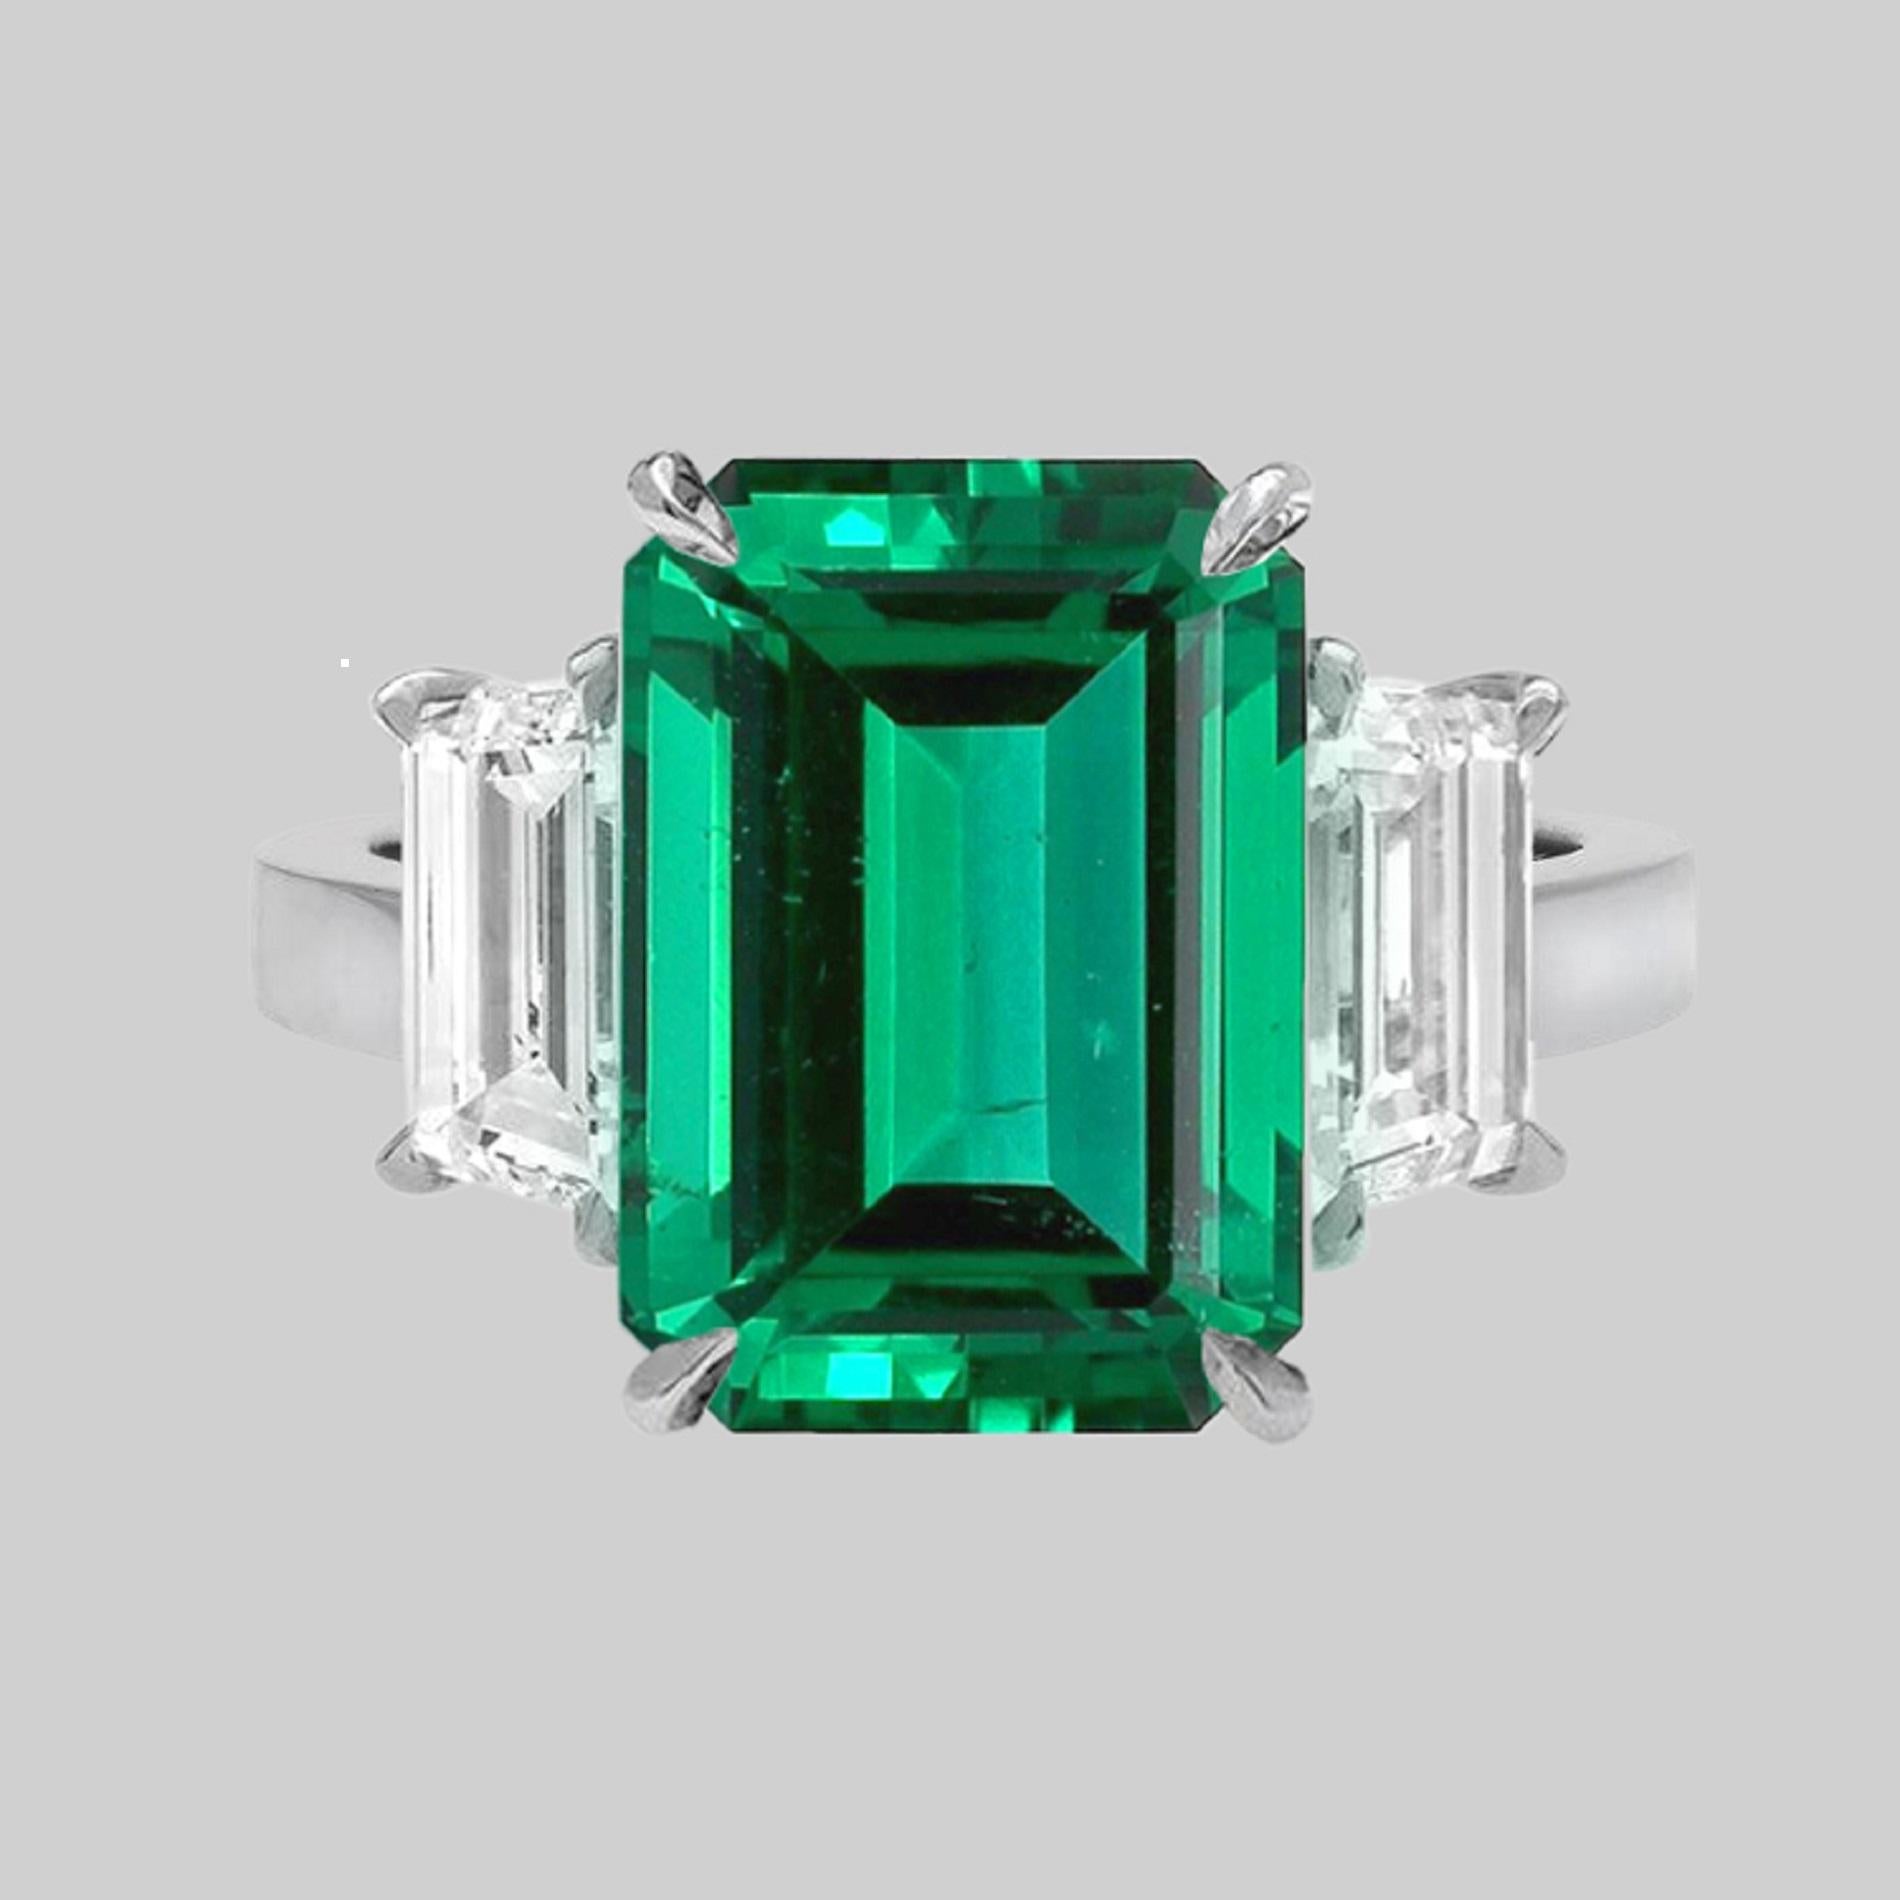 Modern Minor Oil GRS Certified 6 Carats VIVID Green Emerald Diamond Ring For Sale